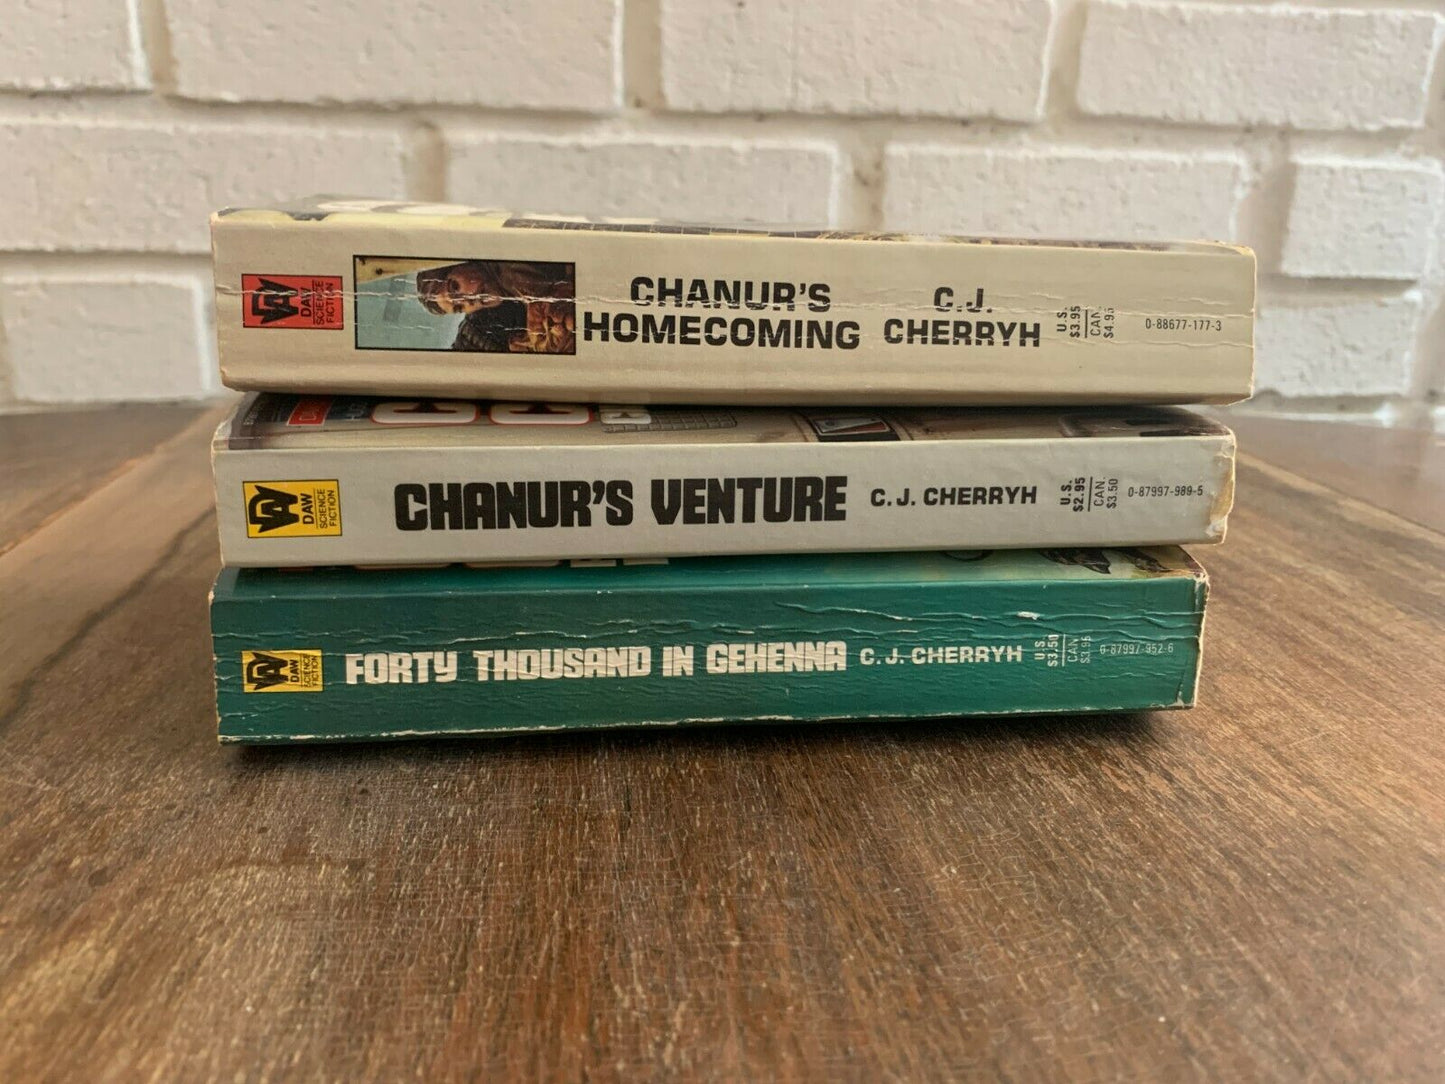 Chanur's Venture, Home-Coming, Forty Thousand in Gehenna, C. J. Cherryh, DAW A4